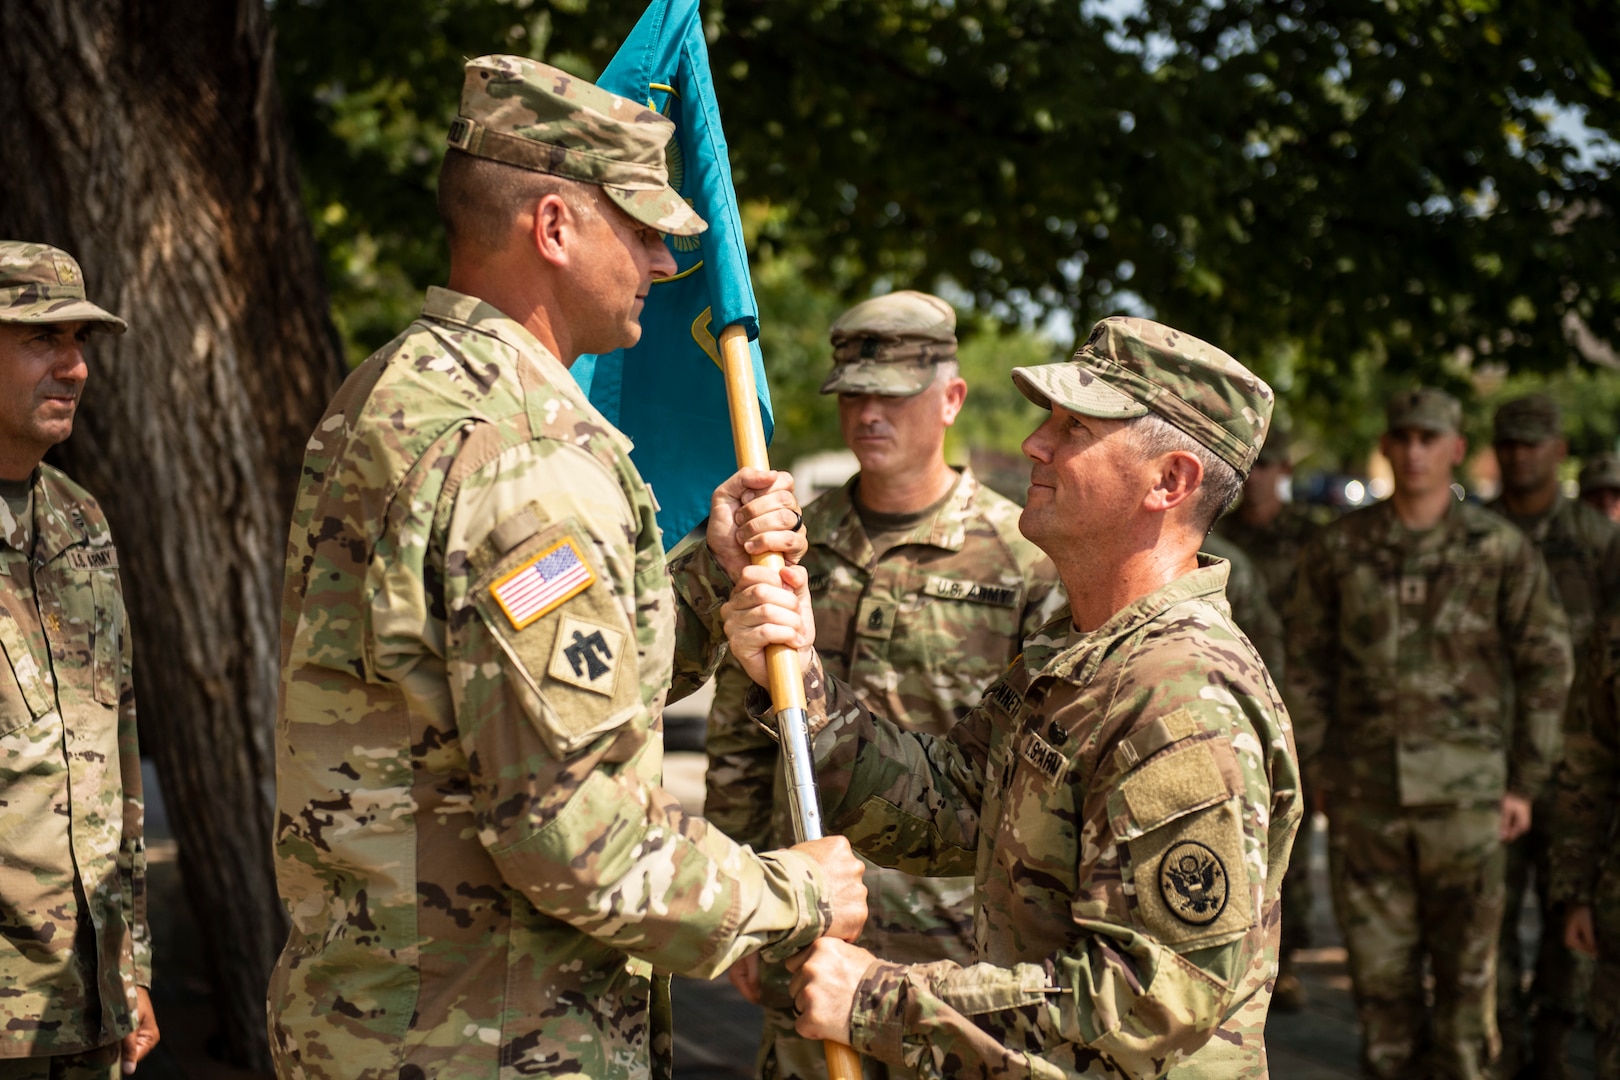 Oklahoma National Guard Lt. Col. Carl Bennett,  outgoing commander with the 63rd CST, passes the unit guidon to Col. Lars Ostervold, commander of the 90th Troop Command, during a change of command ceremony at the Oklahoma City Memorial and Museum, Sept. 1.  The passing of the guidon signifies the formal transfer of authority and responsibility of the unit to the new commander.